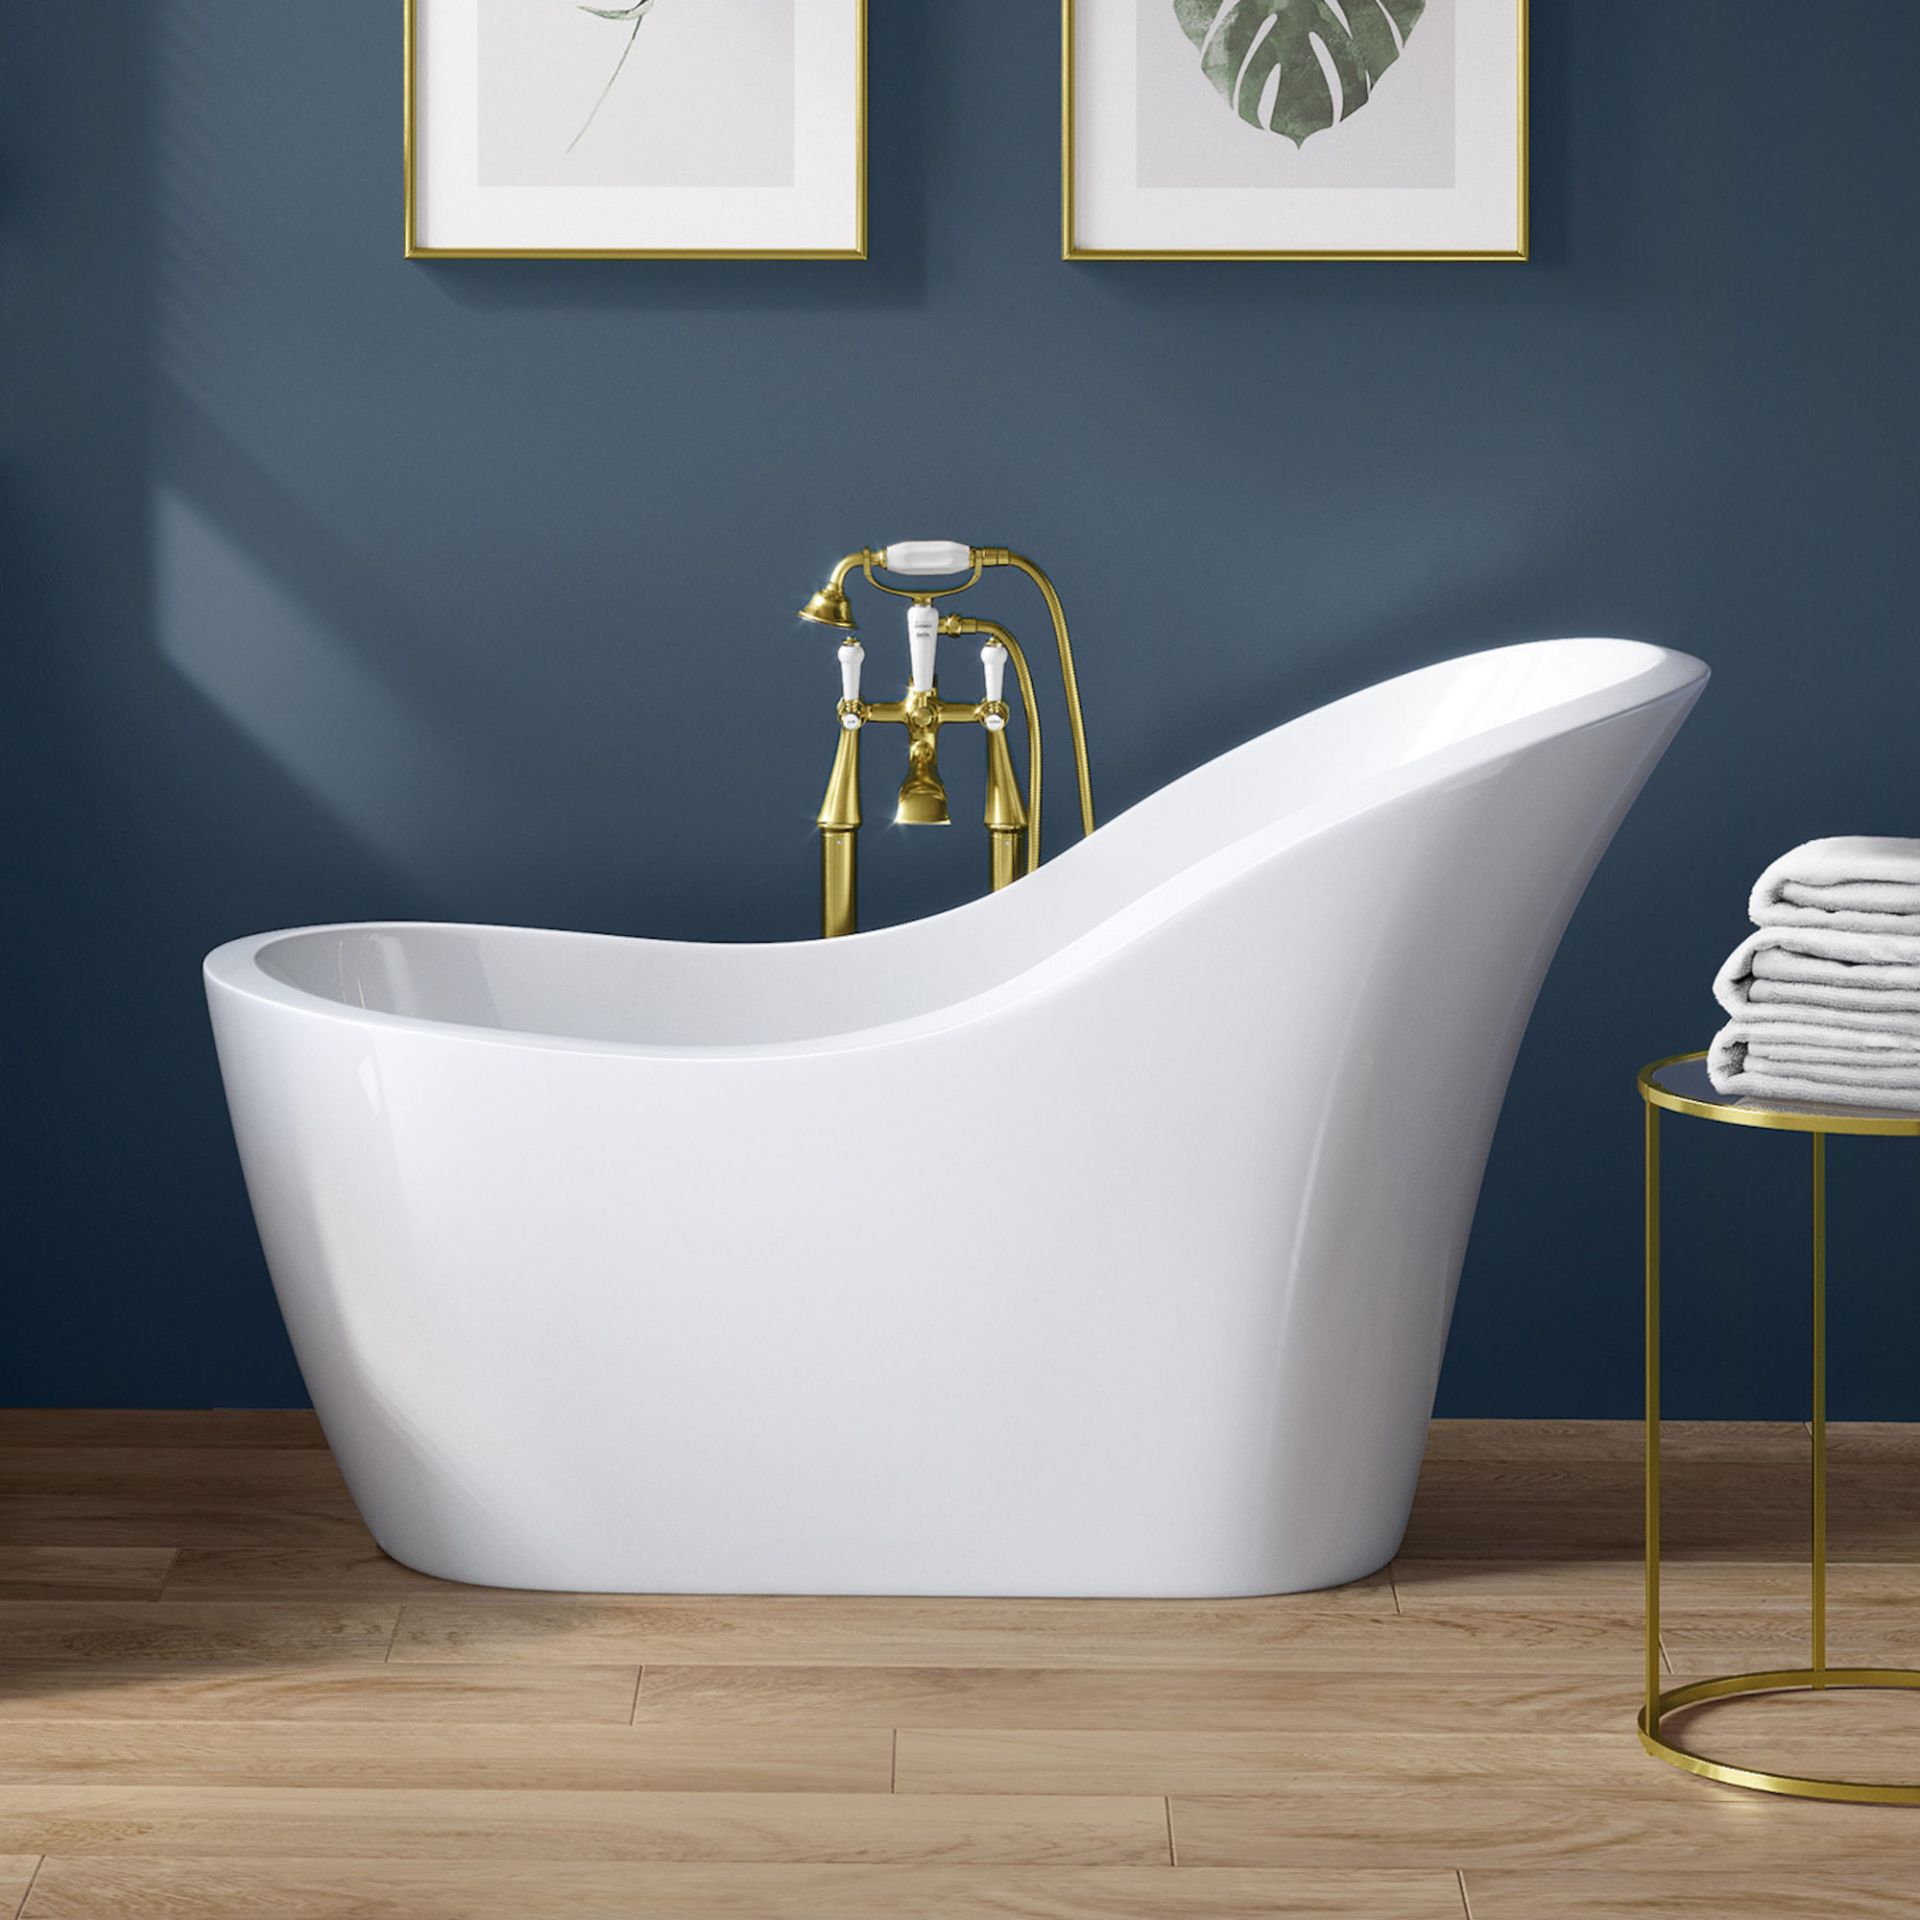 (KL7) 1520x720mm Evelyn Freestanding Bath. Manufactured from High Quality Acrylic, complimented by a